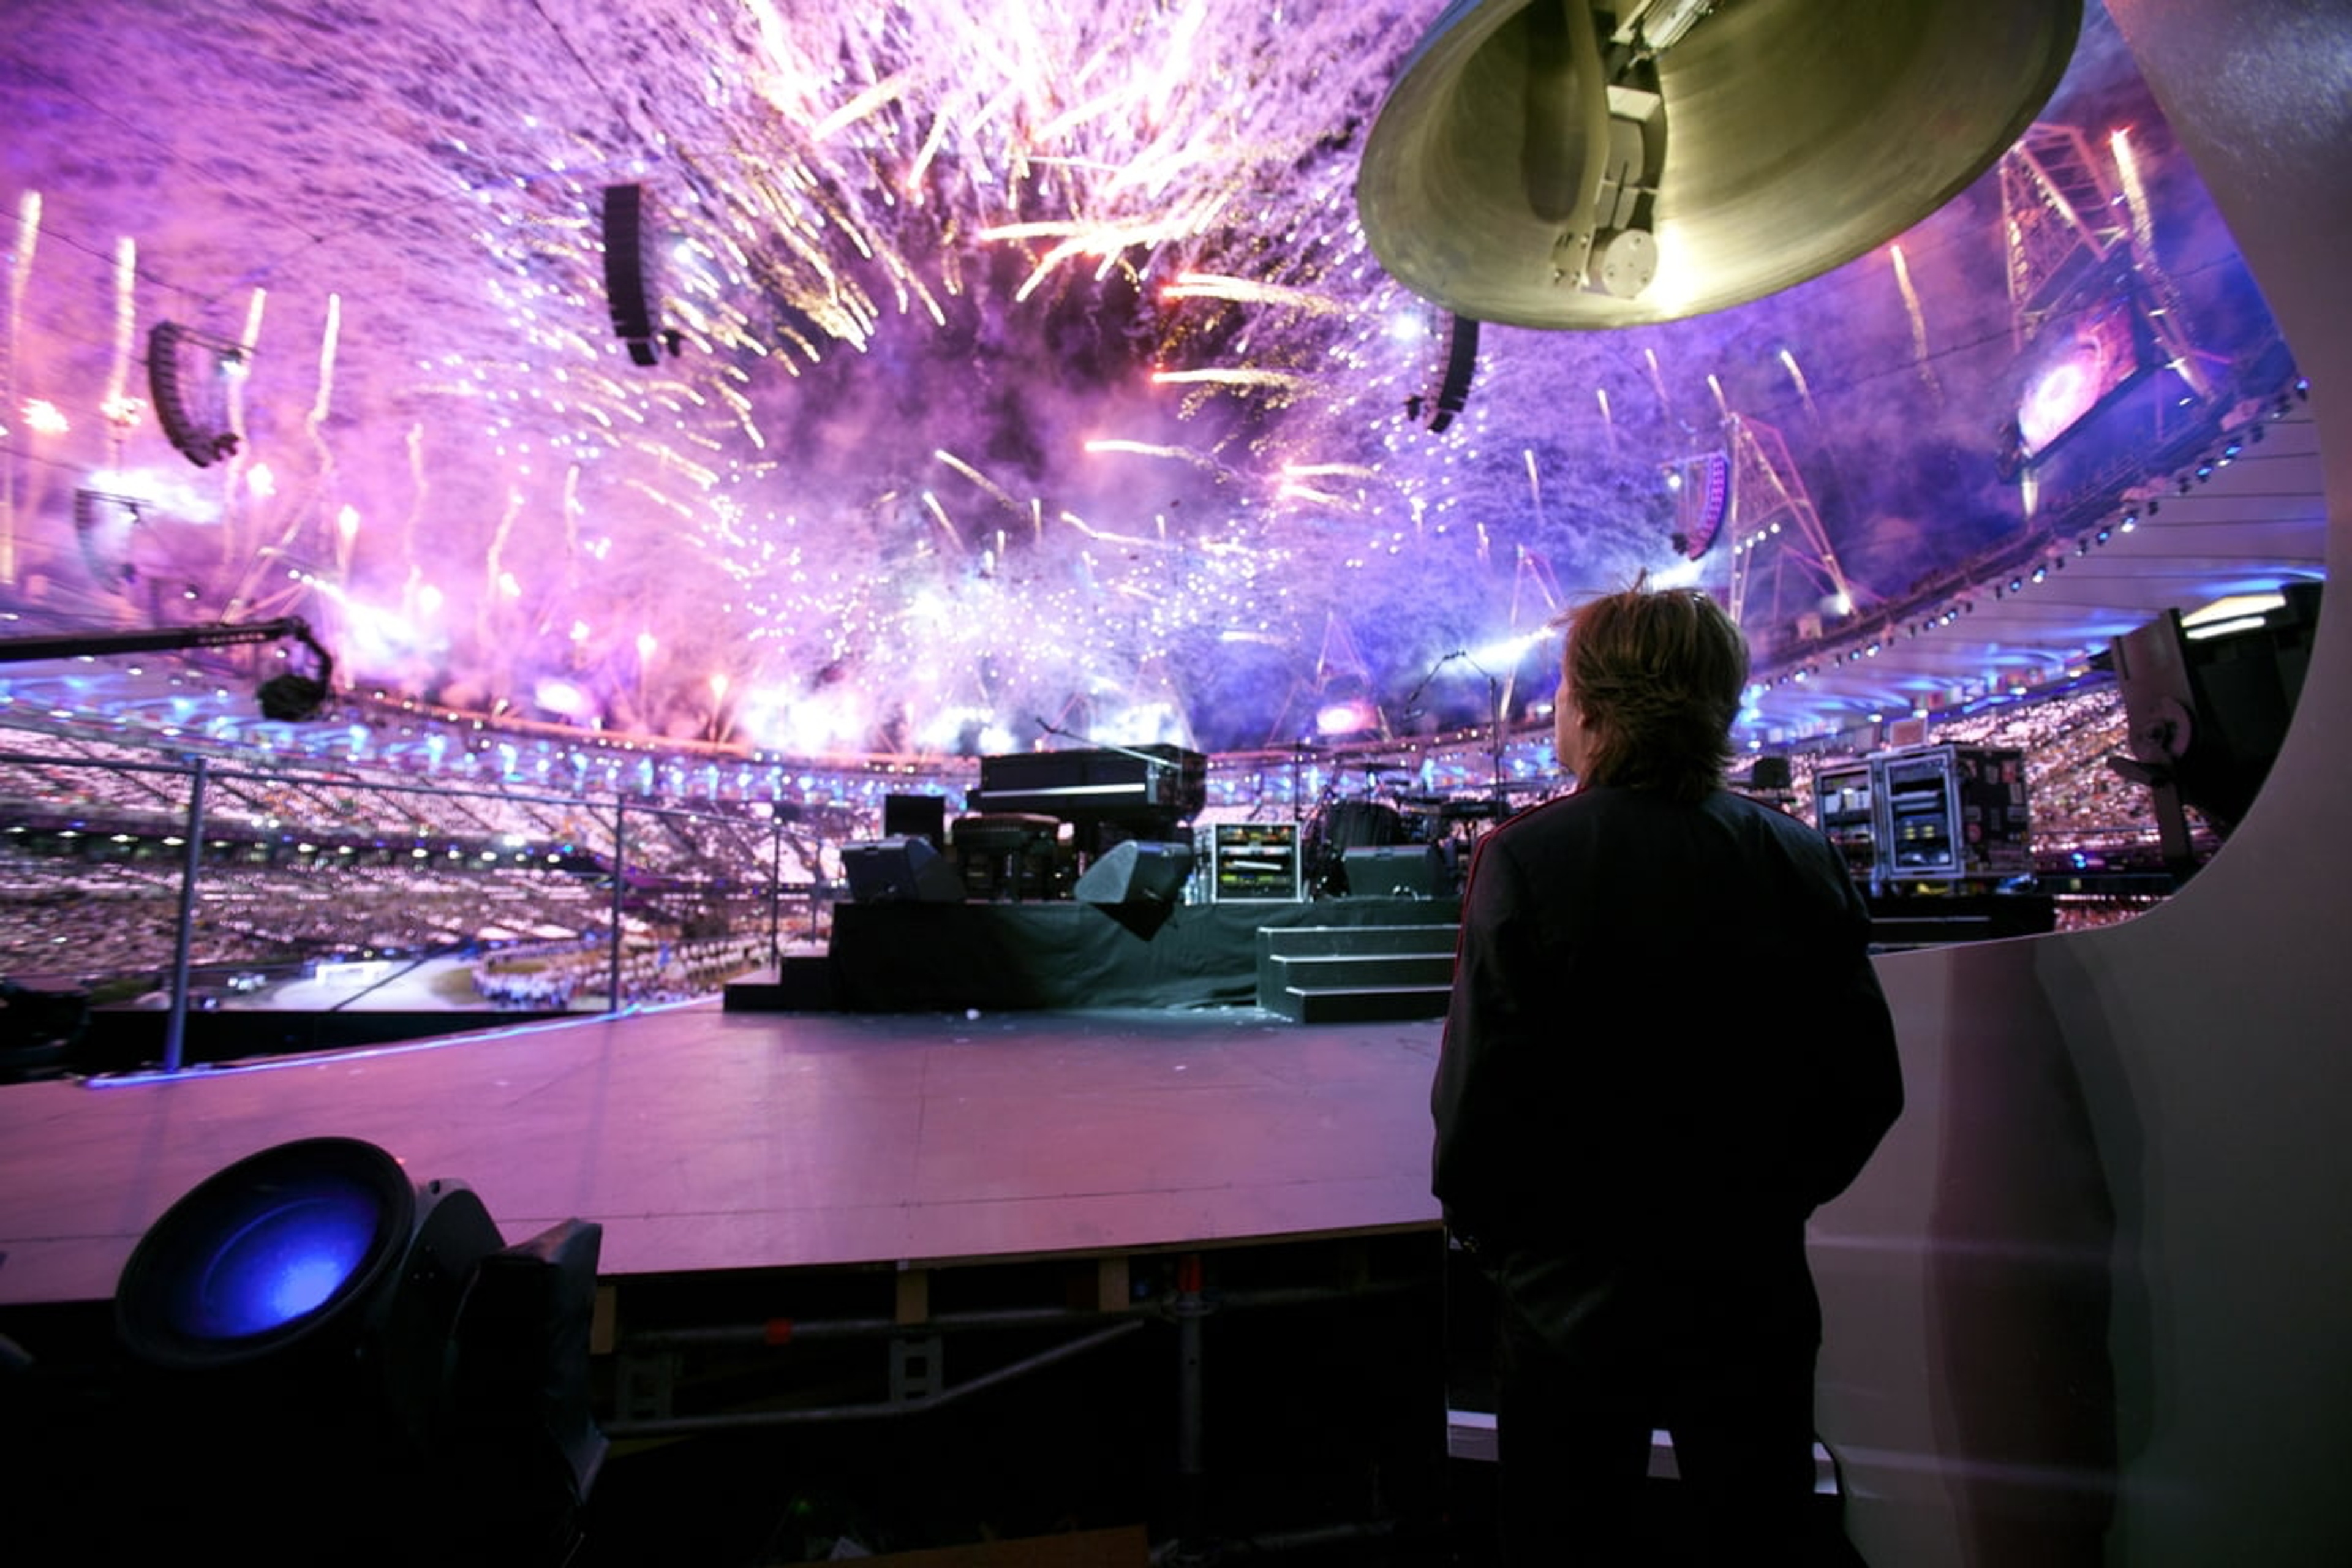 Paul watching the fireworks at the end of the Olympics Opening Ceremony, London, 27-Jul-12